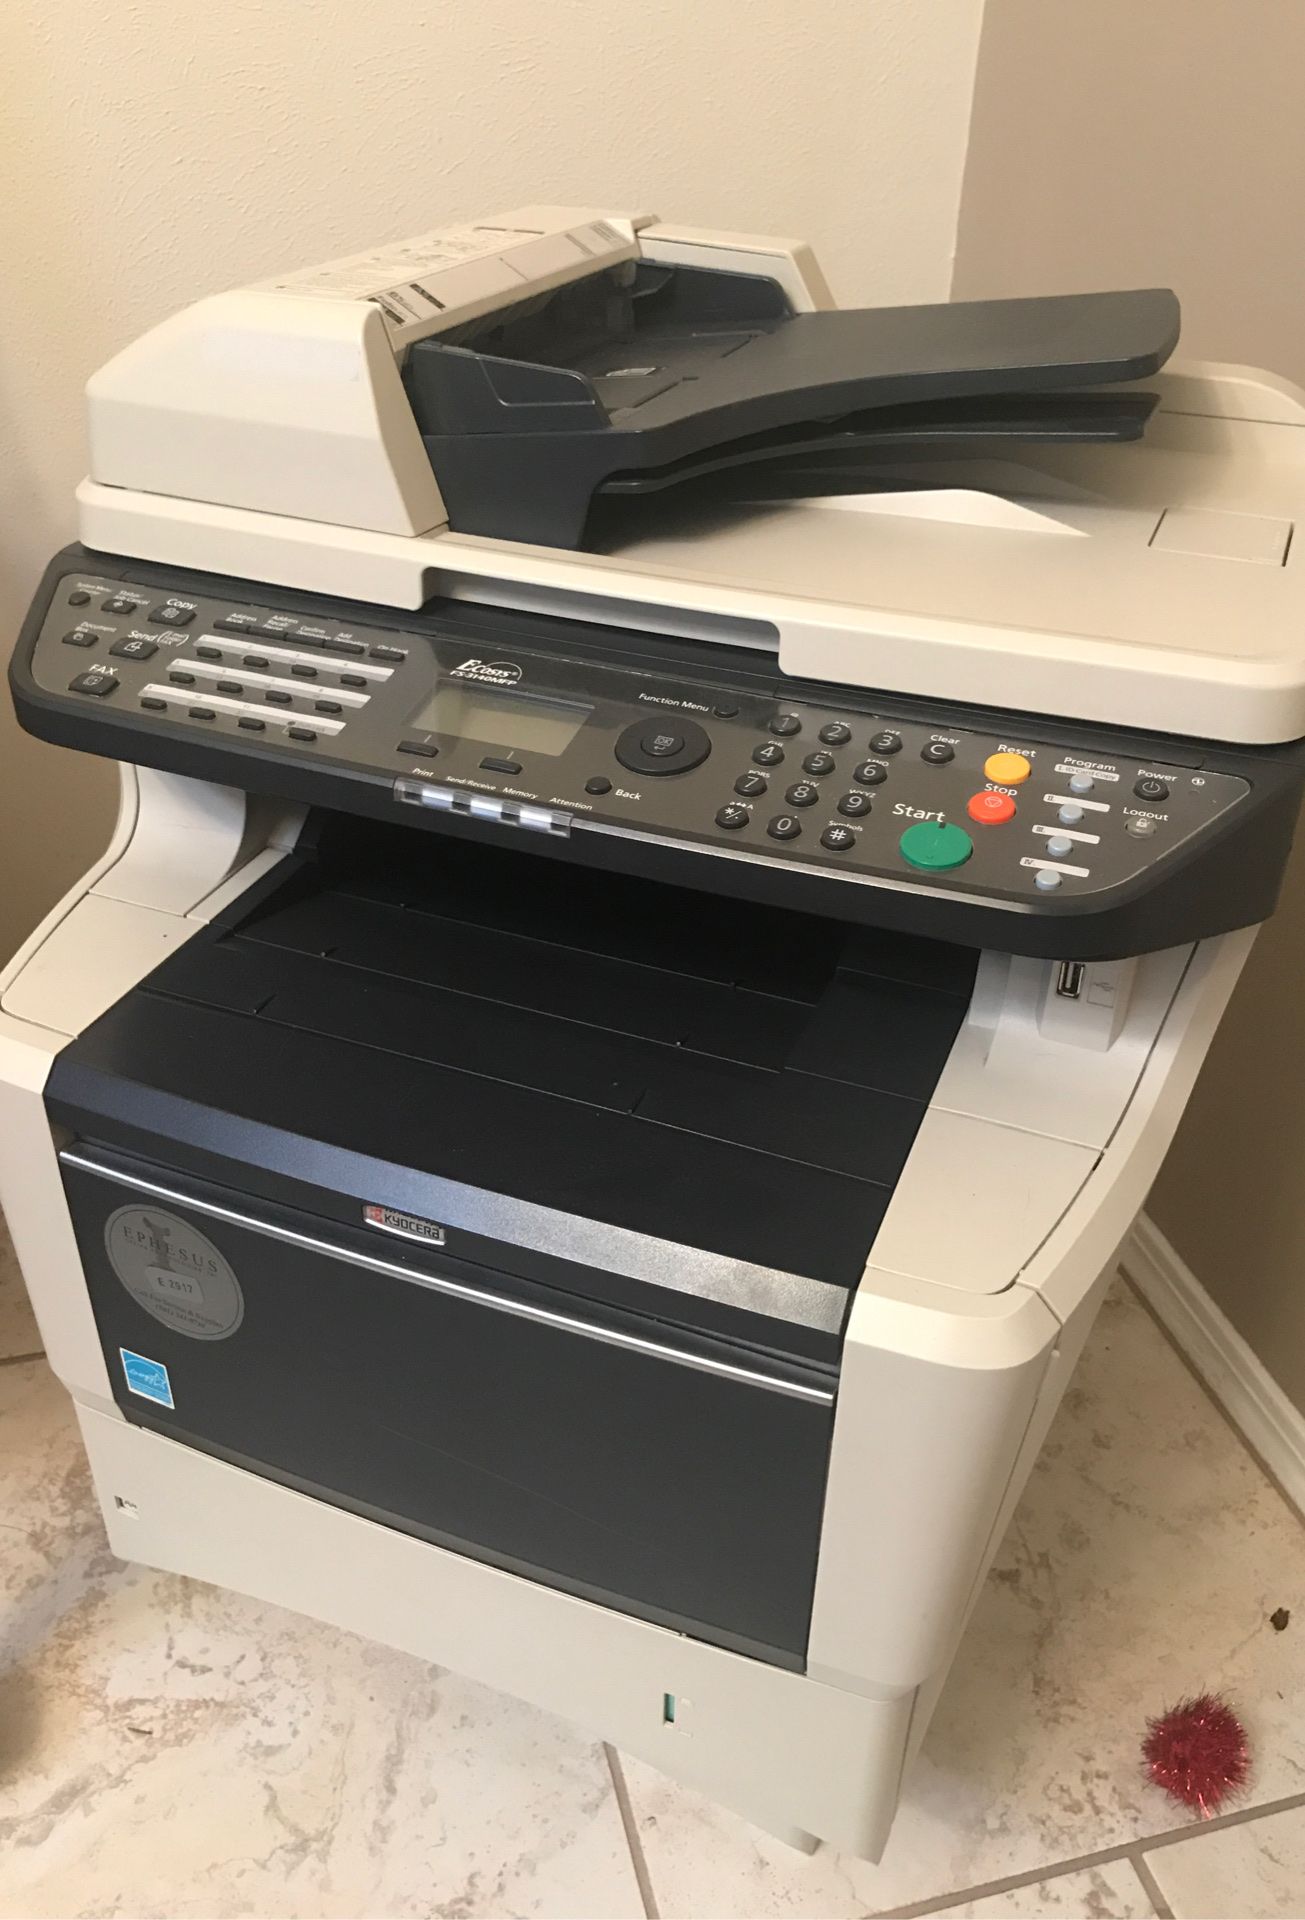 Kyocera Large capacity printer with additional paper trays